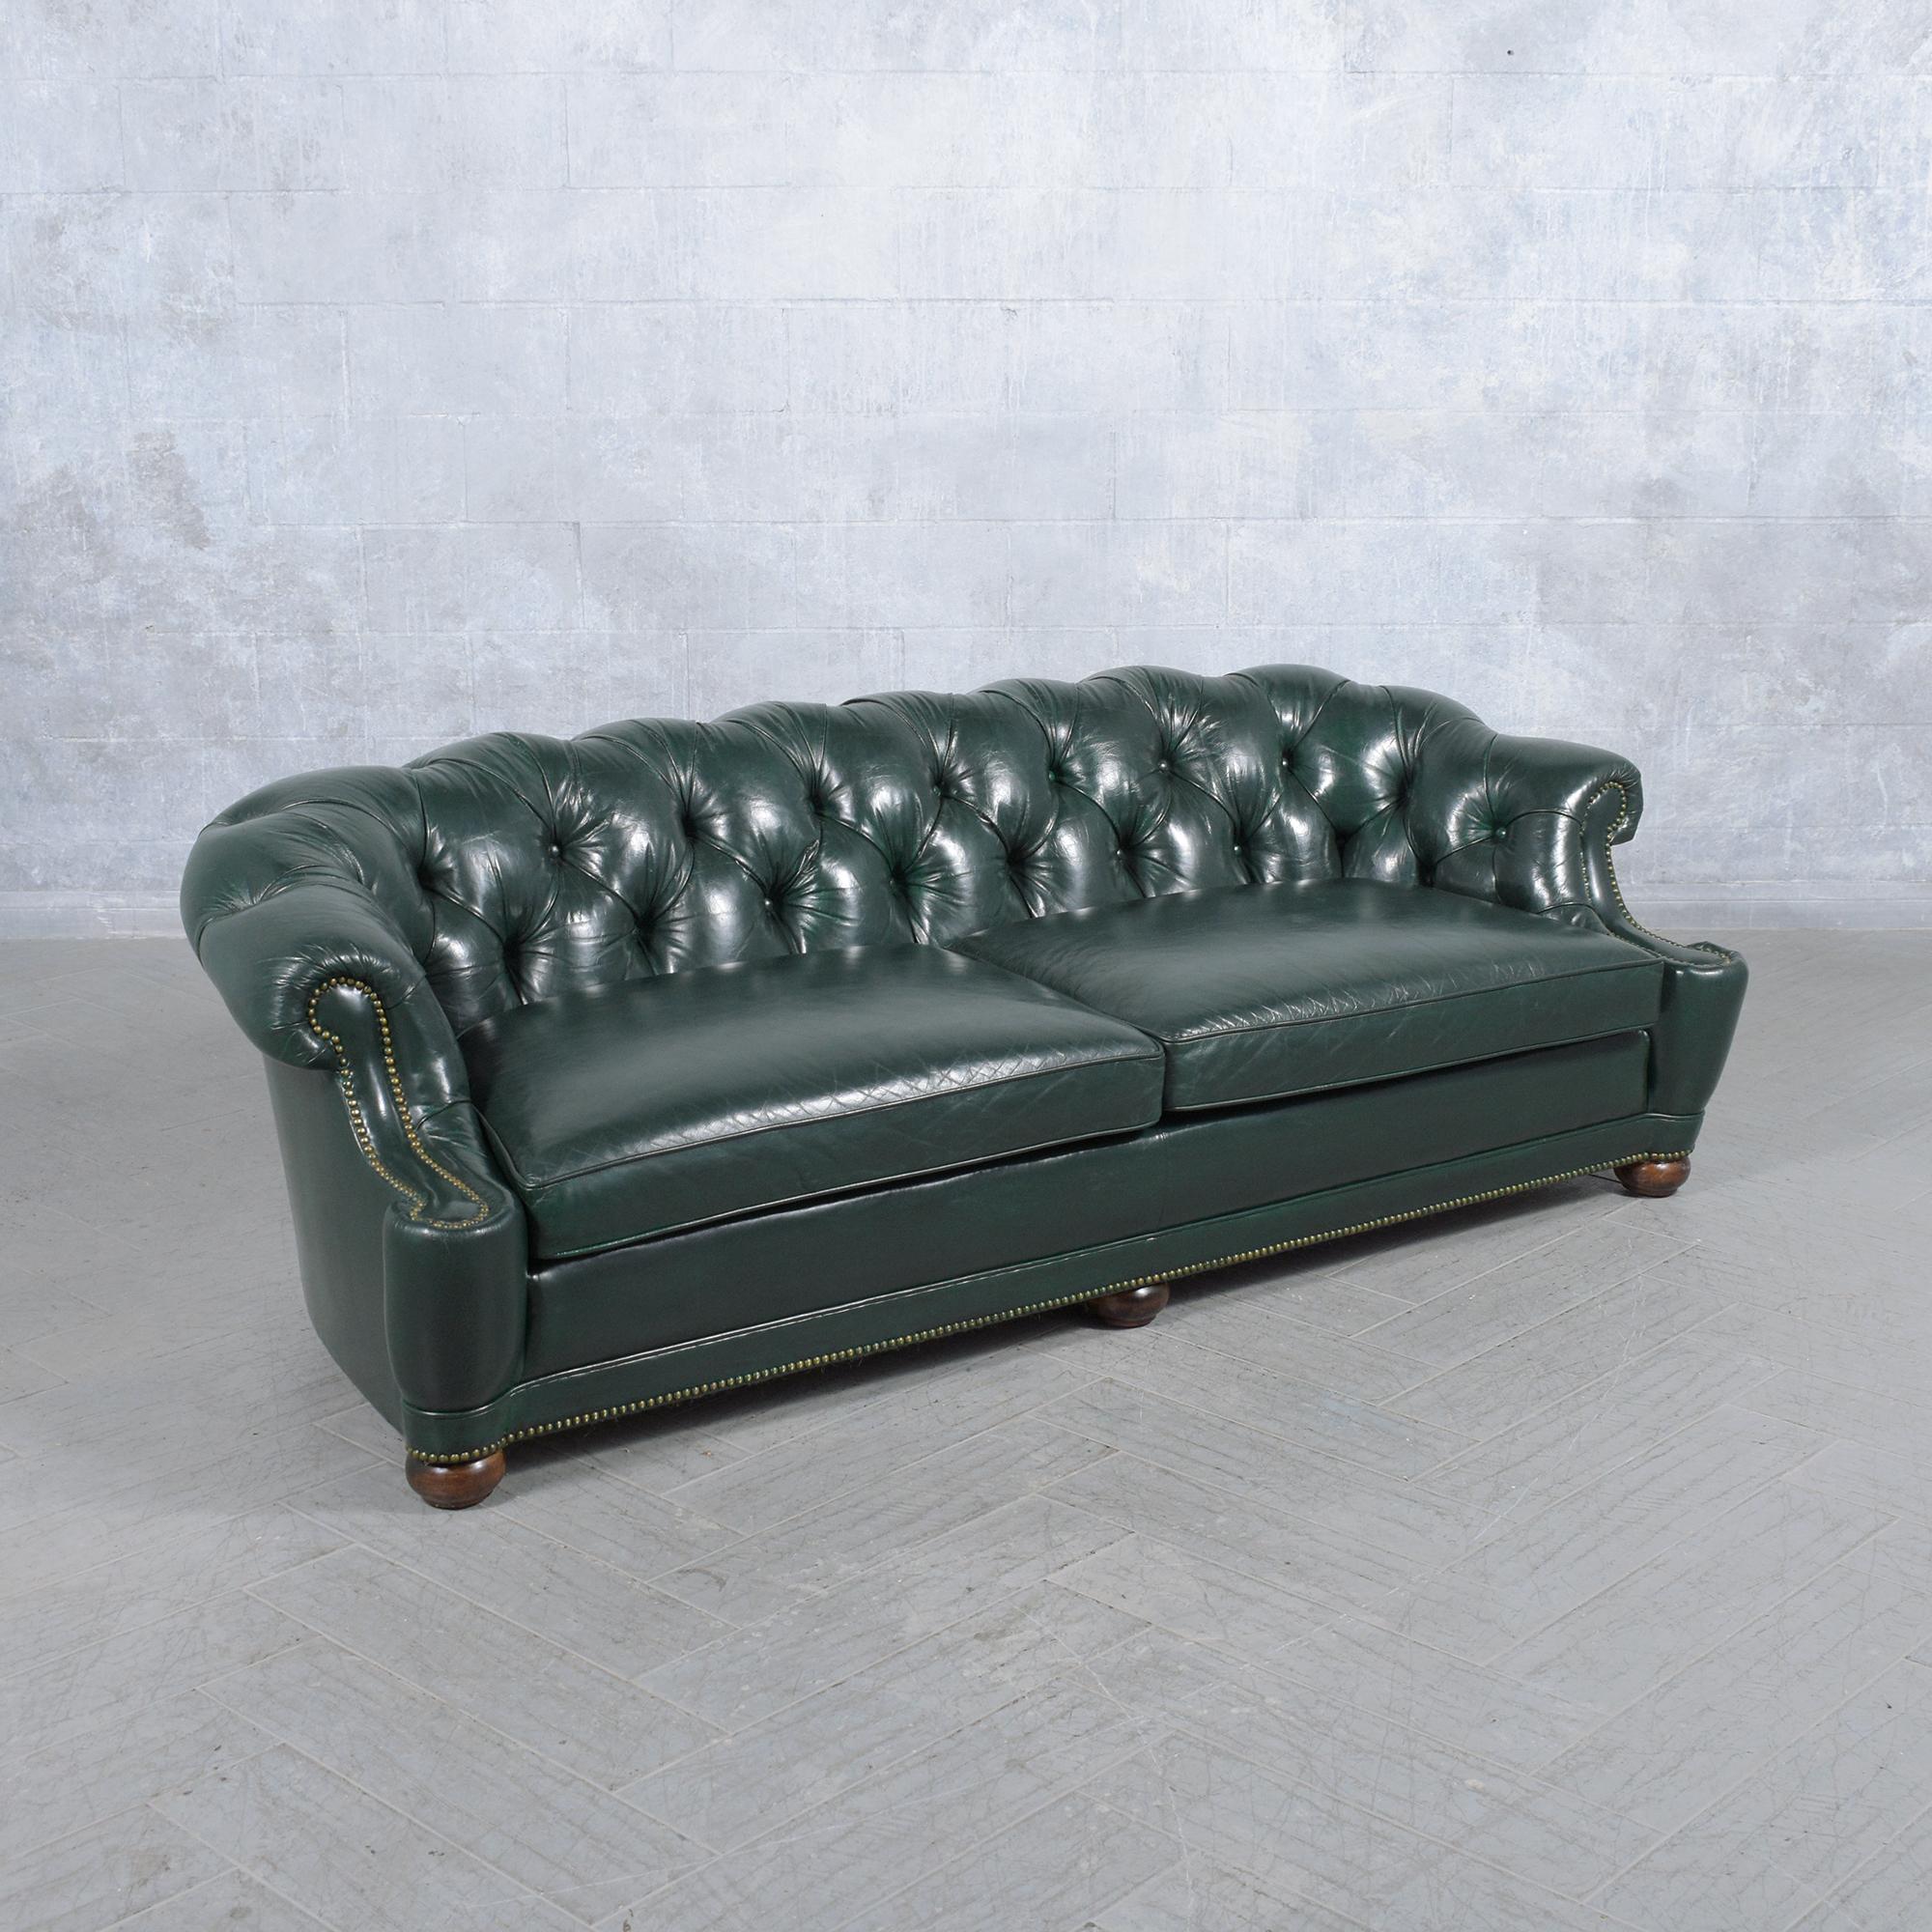 Lacquer Refurbished 1970s Emerald Green Italian Chesterfield Sofa - Vintage Elegance